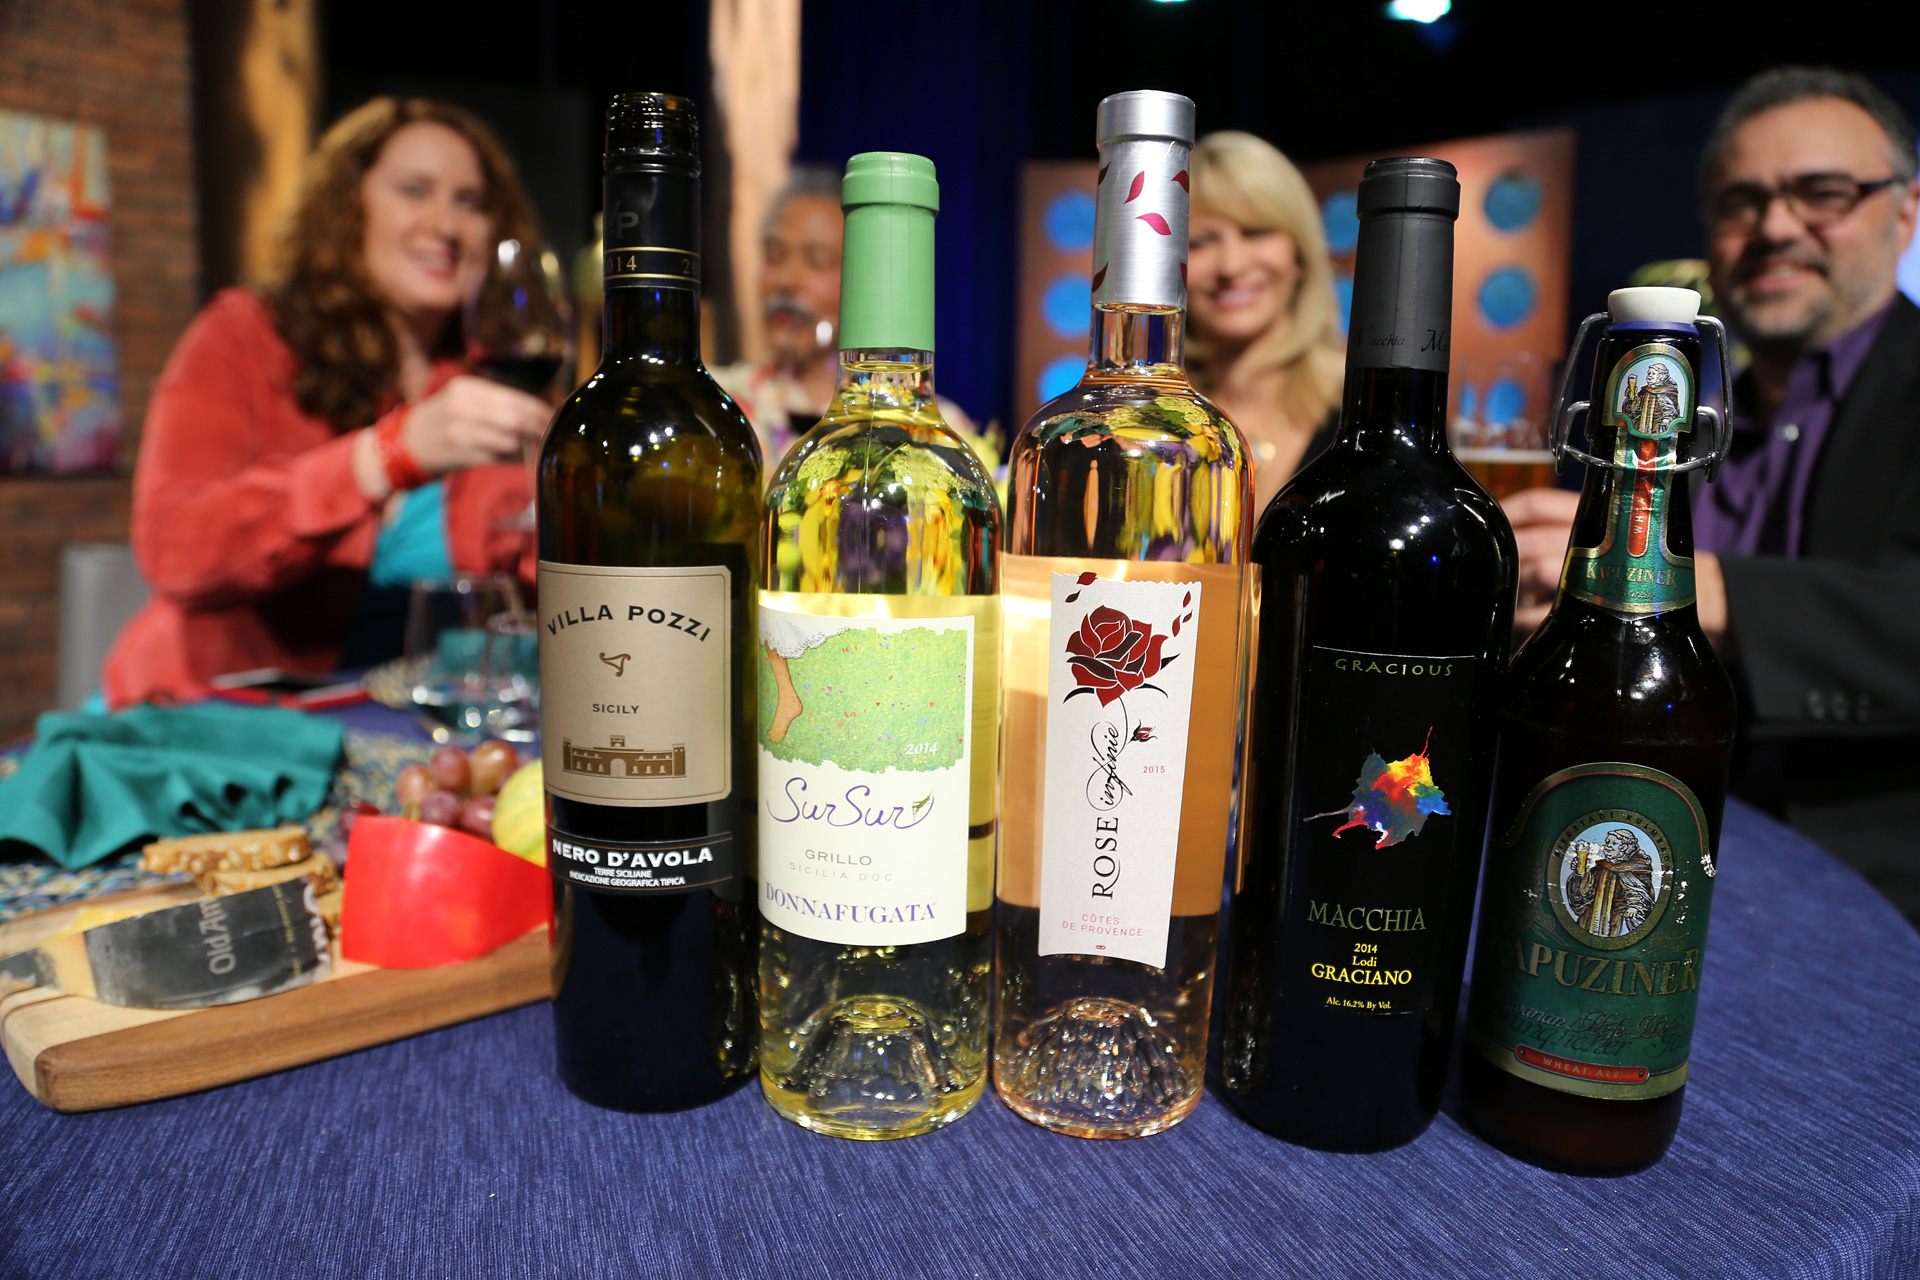 Wines that guests drank on the set of the thirteenth episode of season 11.